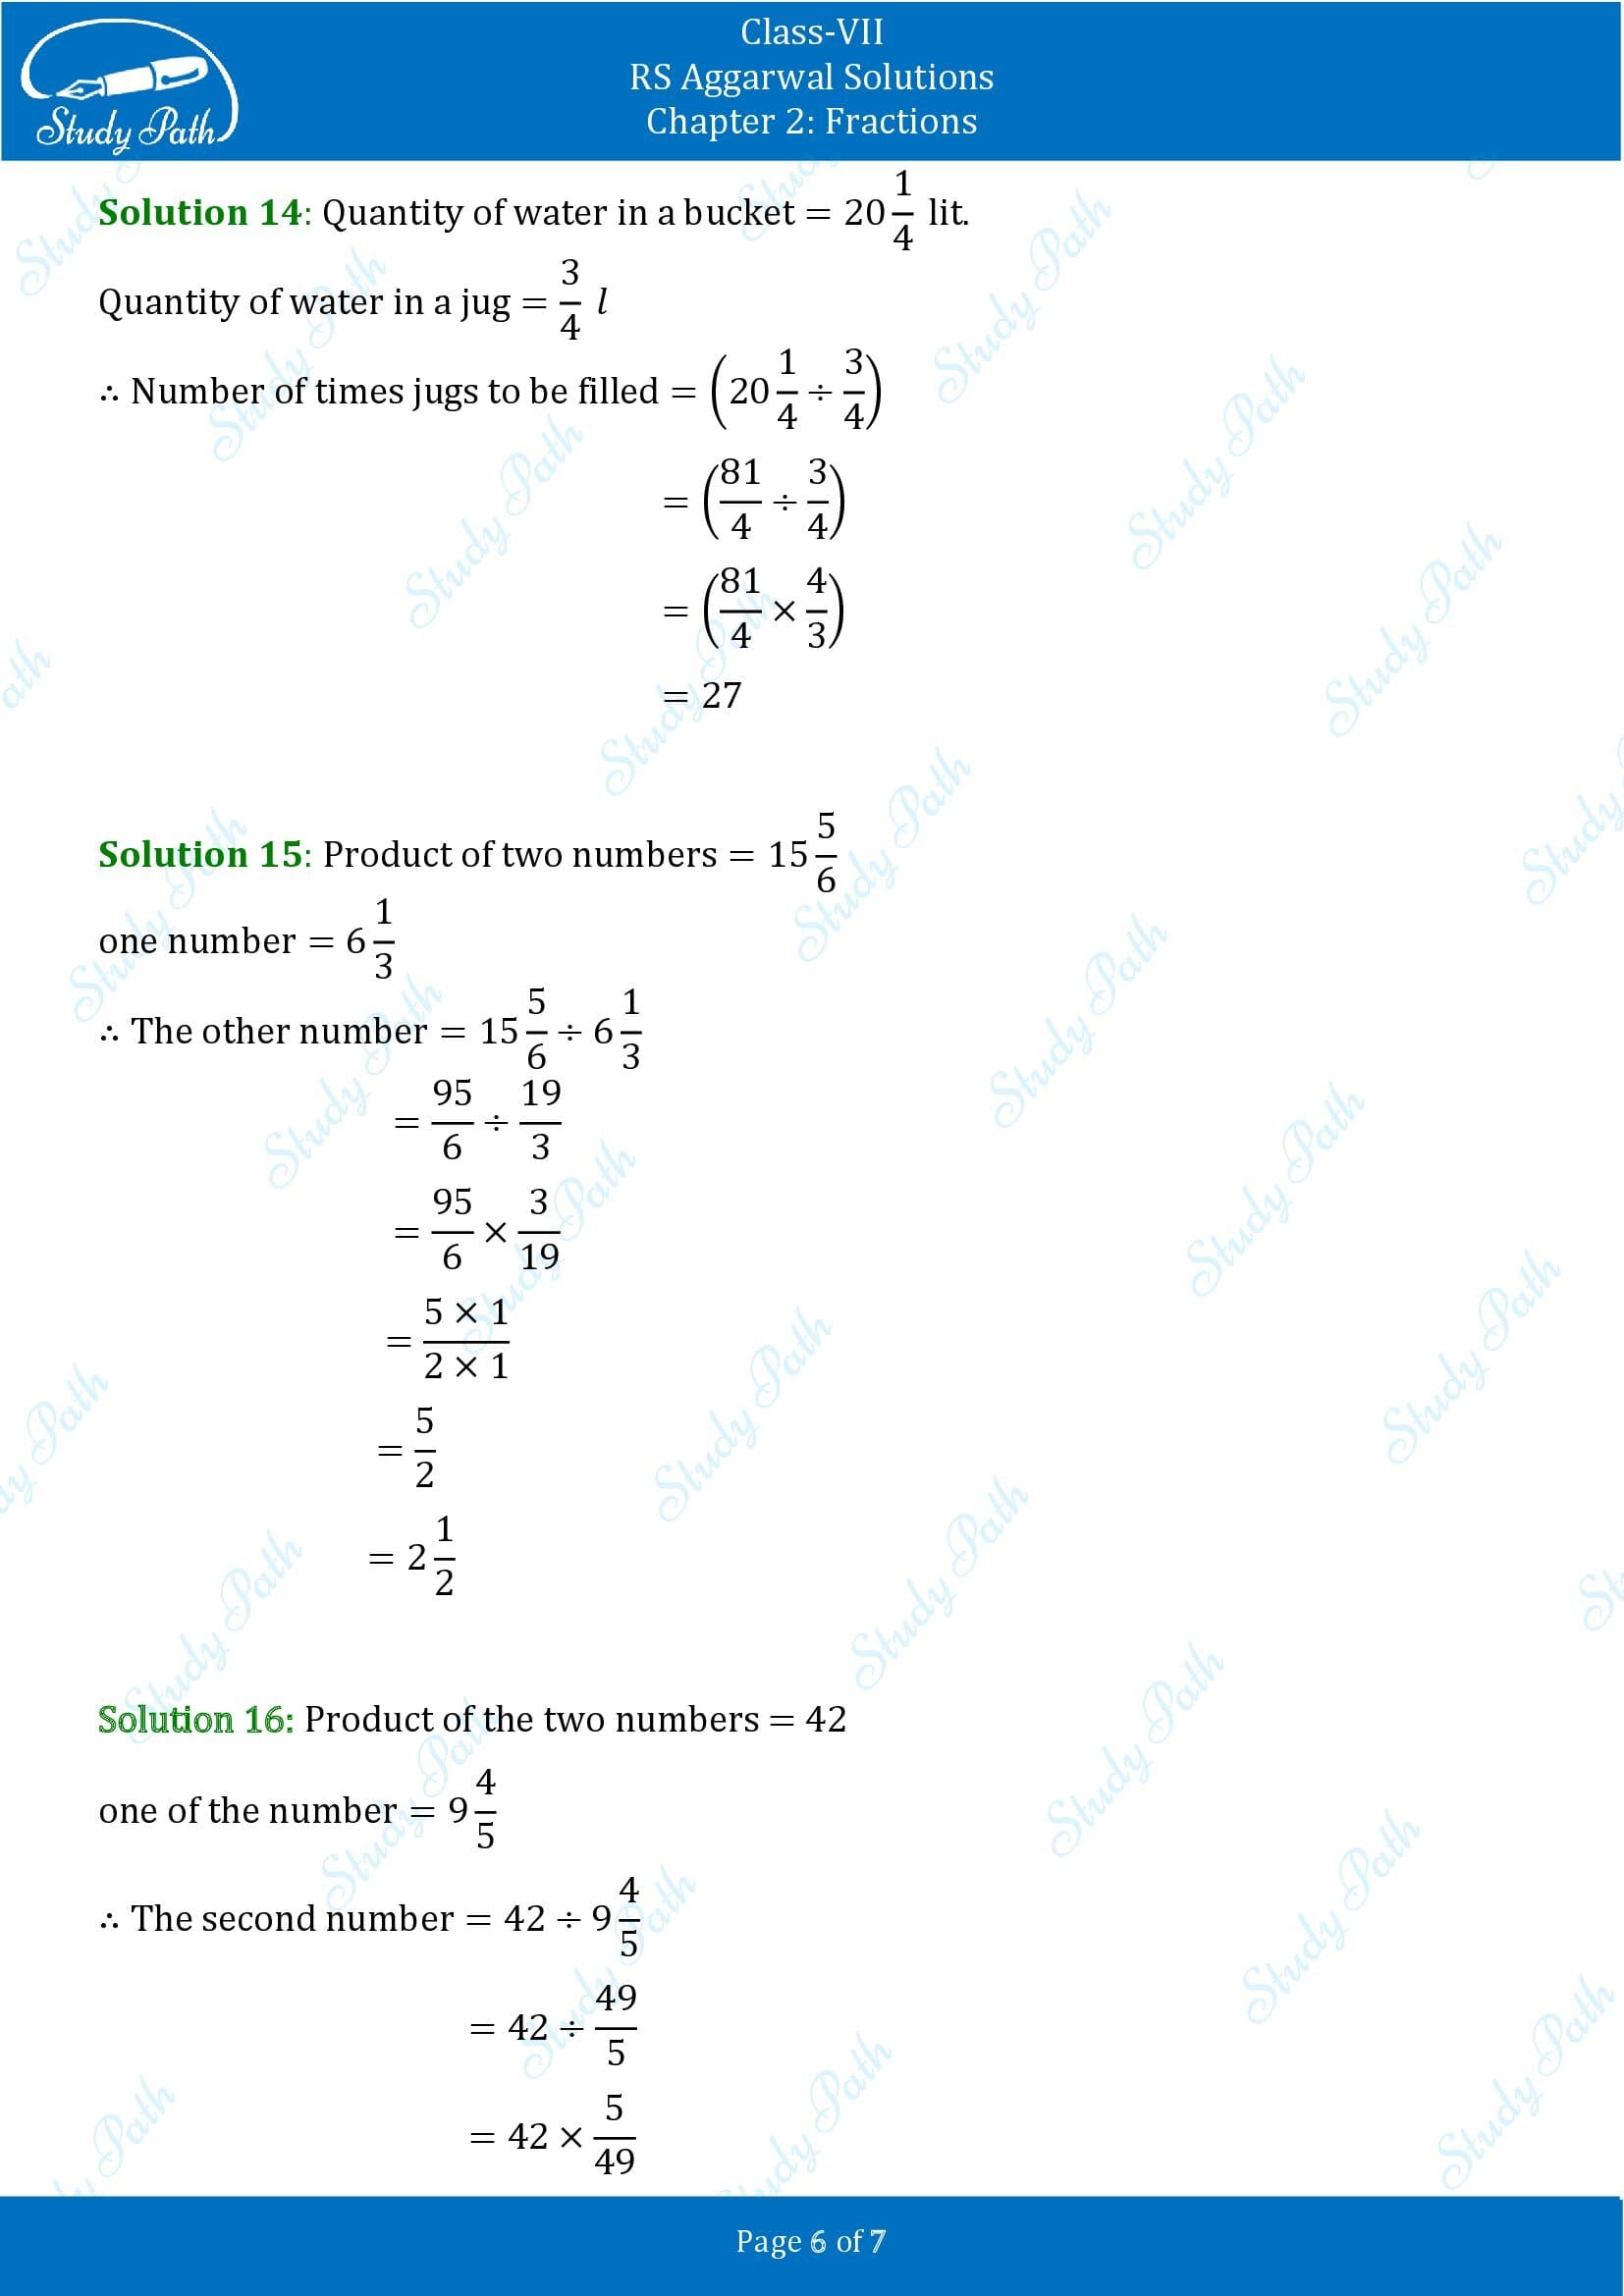 RS Aggarwal Solutions Class 7 Chapter 2 Fractions Exercise 2C 00006